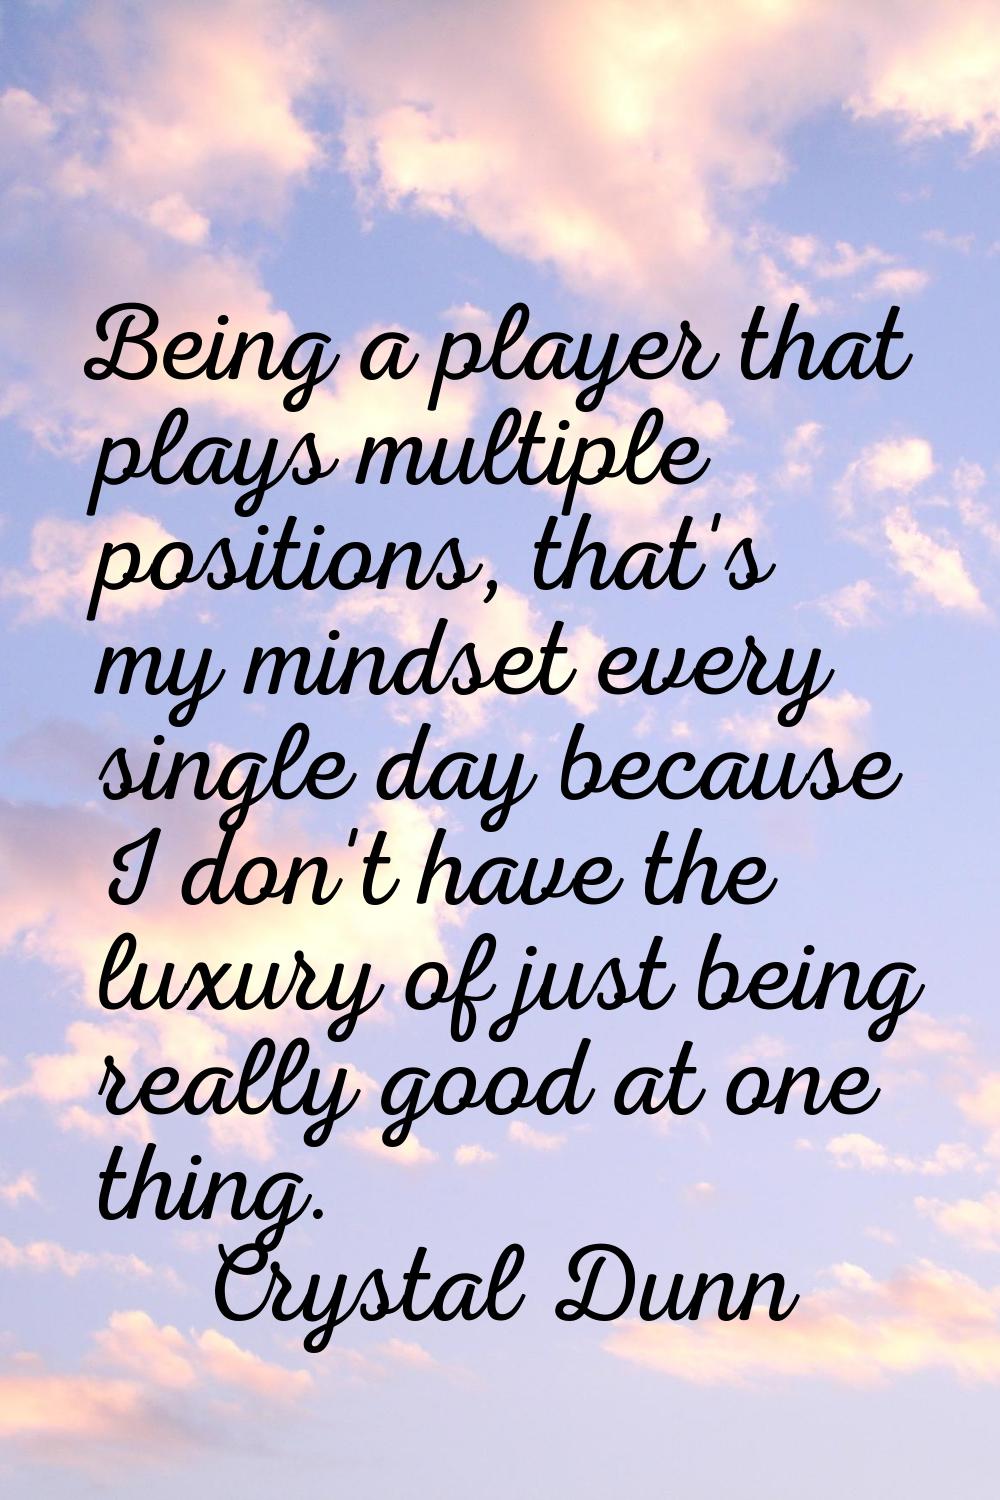 Being a player that plays multiple positions, that's my mindset every single day because I don't ha